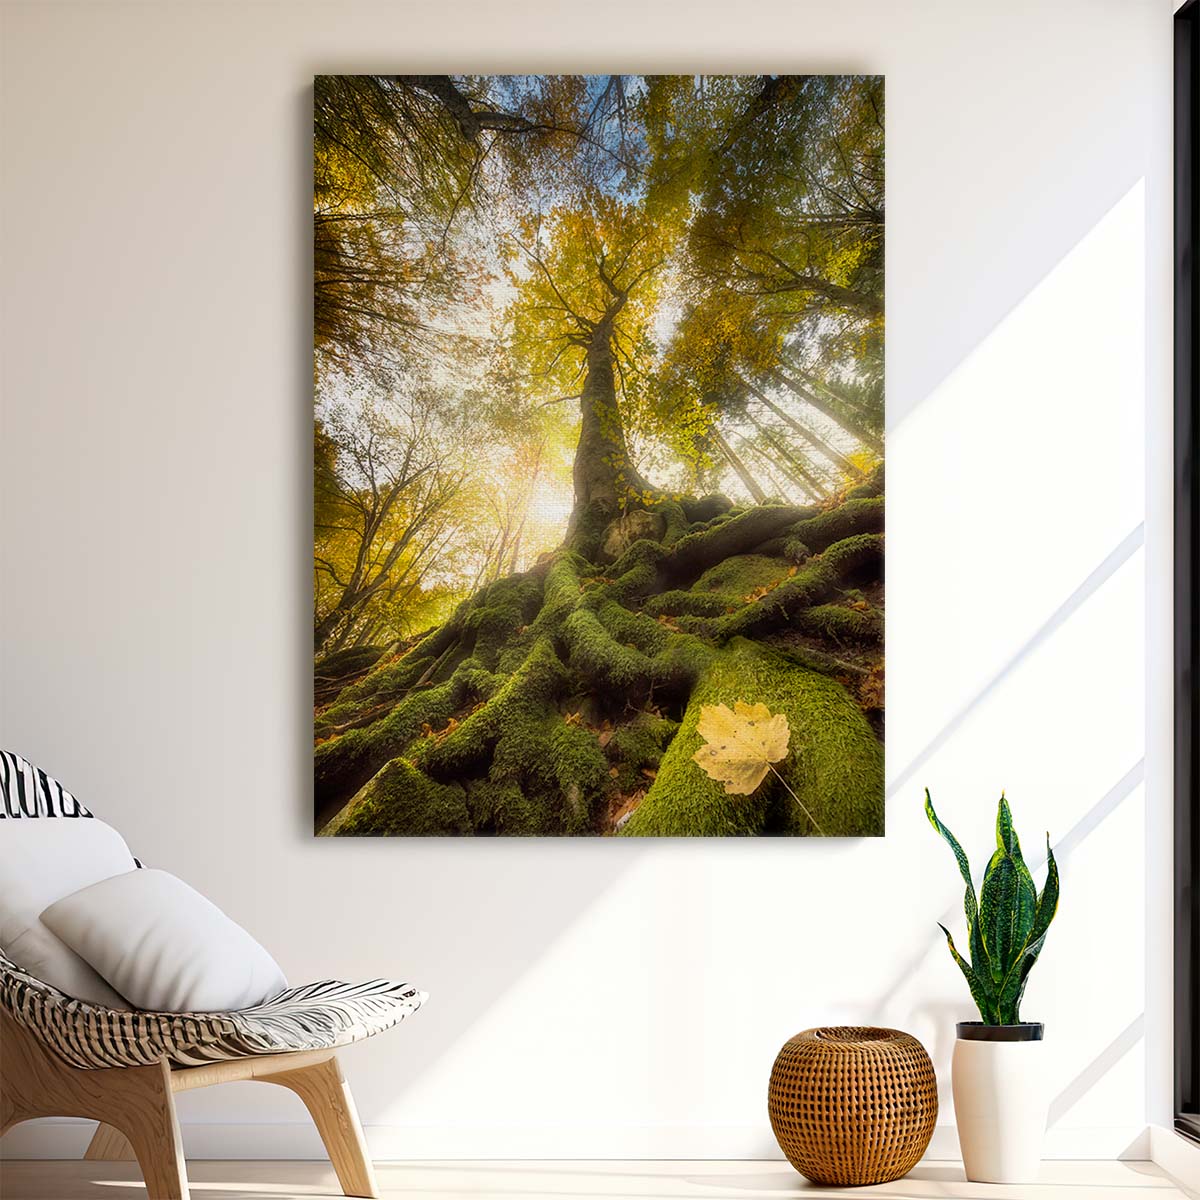 Majestic Autumn Maple Tree Photography Italian Sunrise Landscape by Luxuriance Designs, made in USA